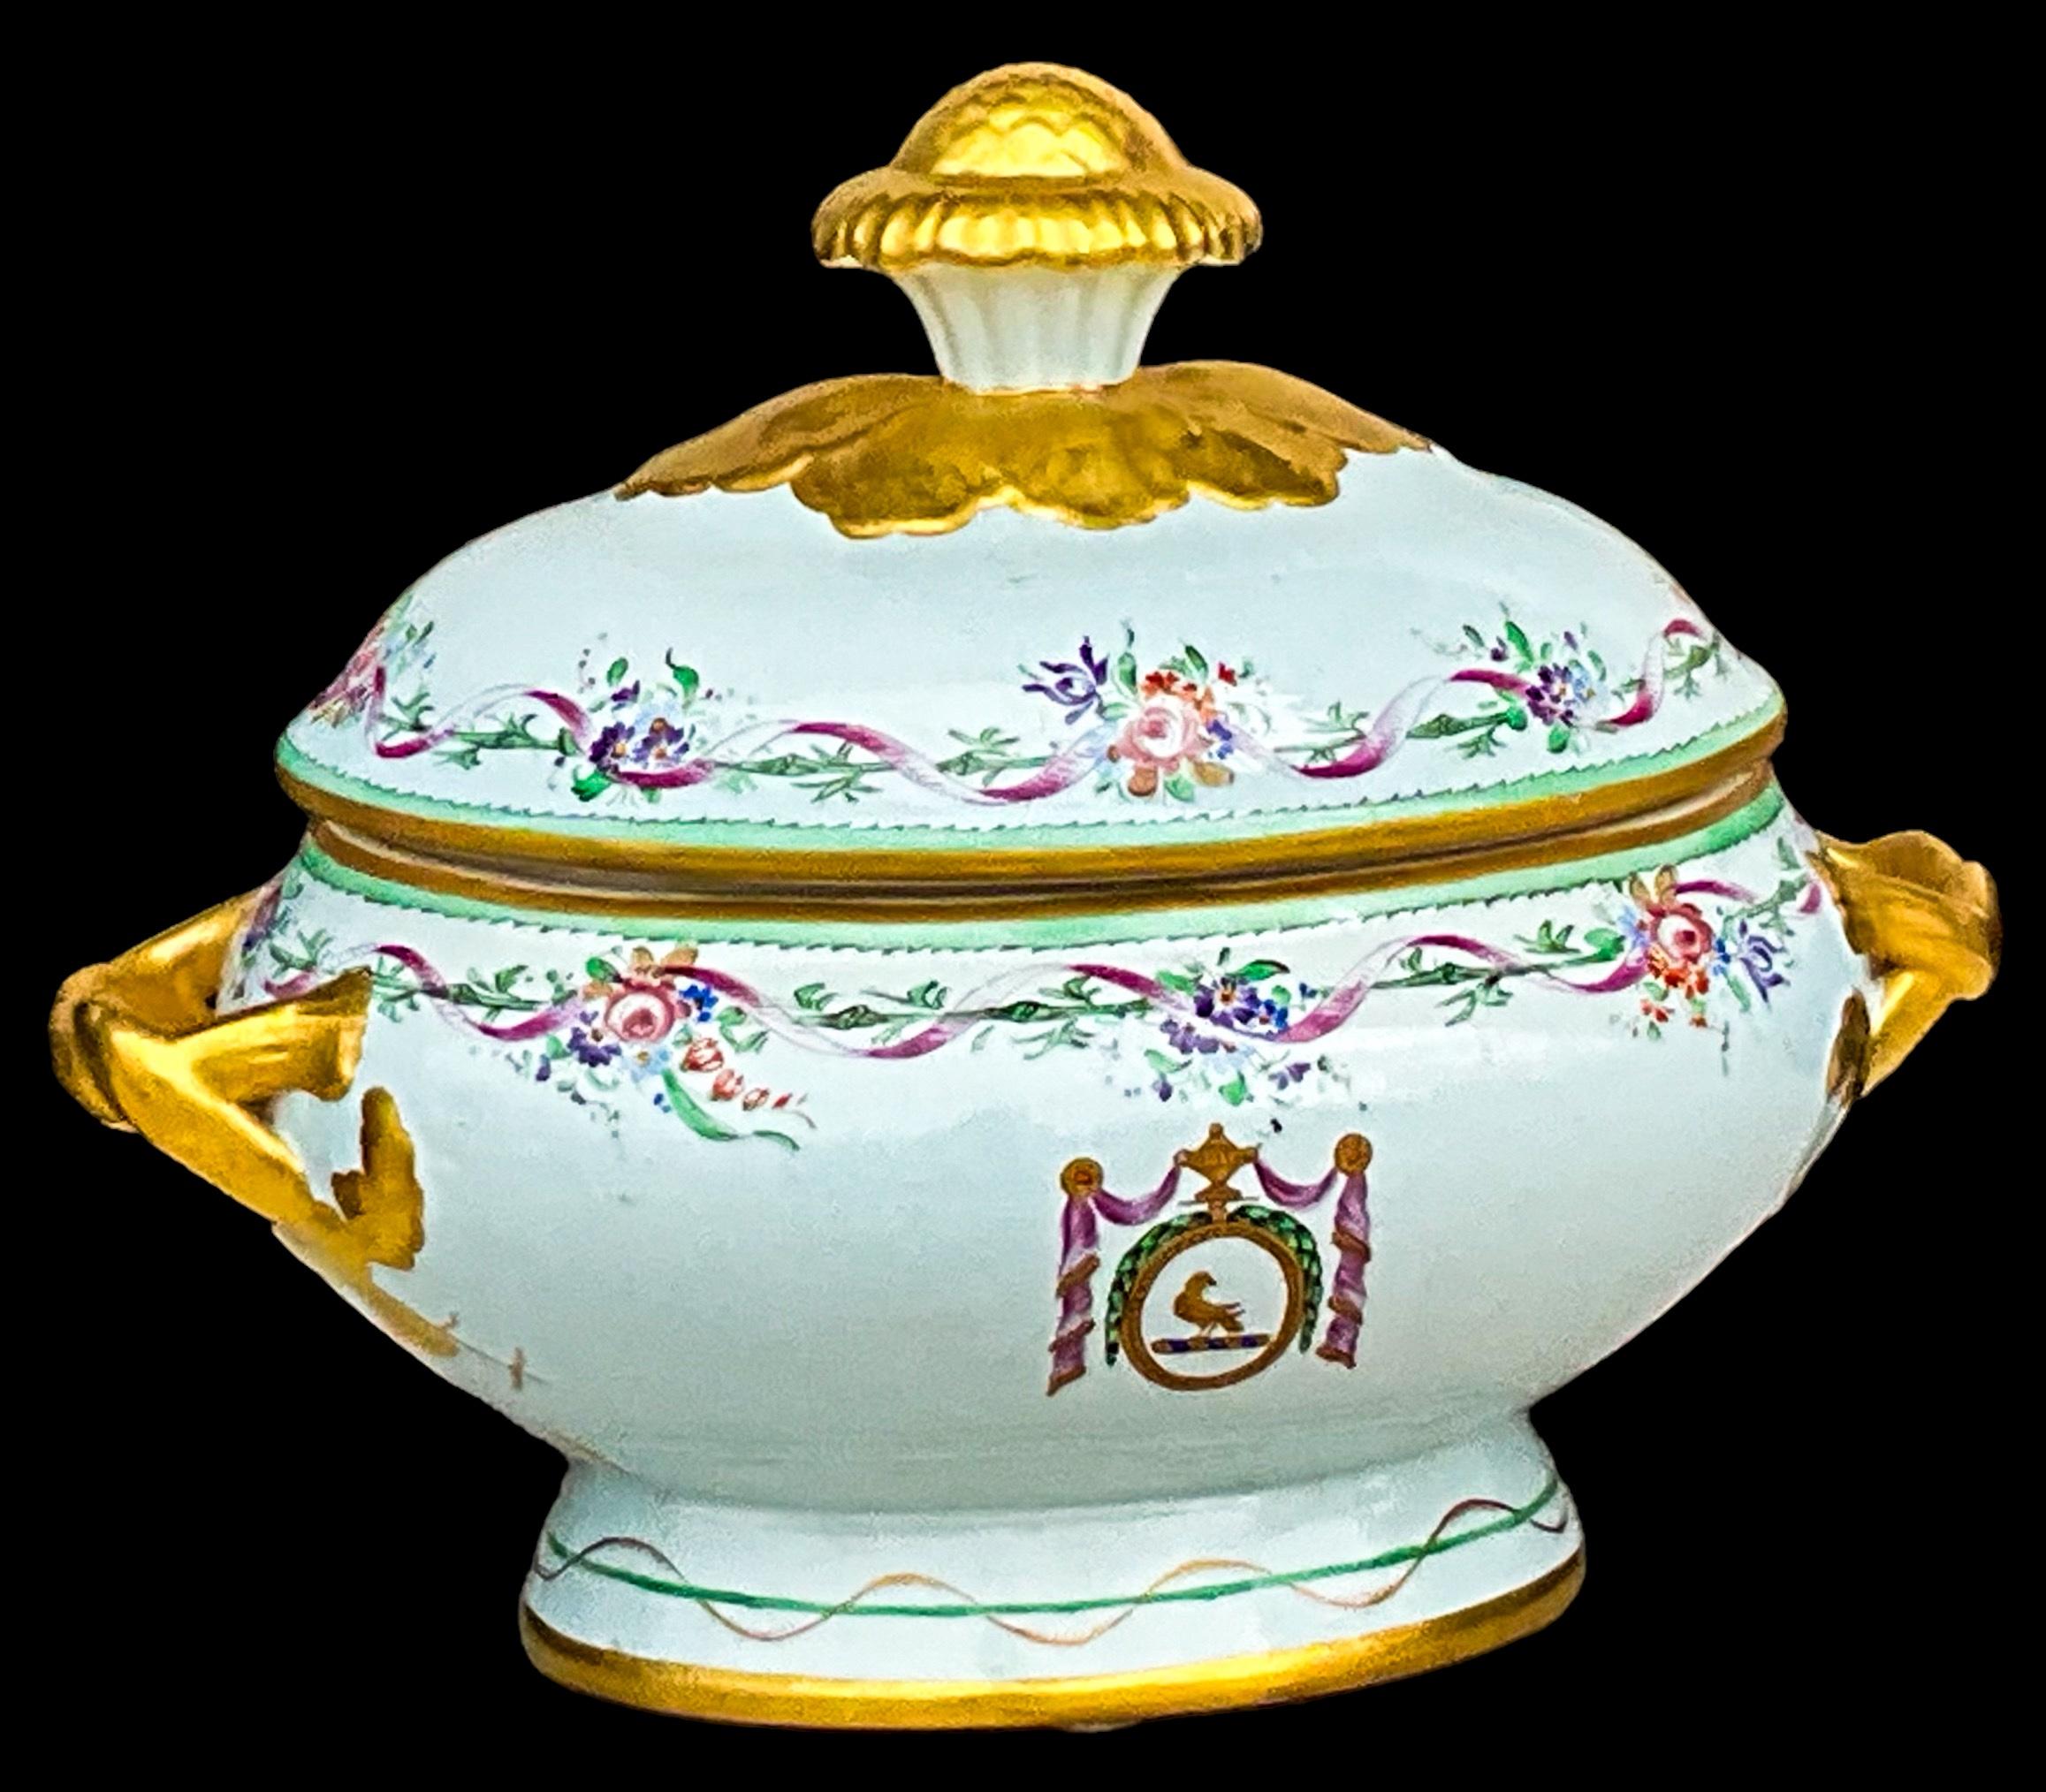 This is a 1960s Italian Mottahedeh hand painted tureen with English armorial styling created by Lowestoft. It is marked and in very good condition.
